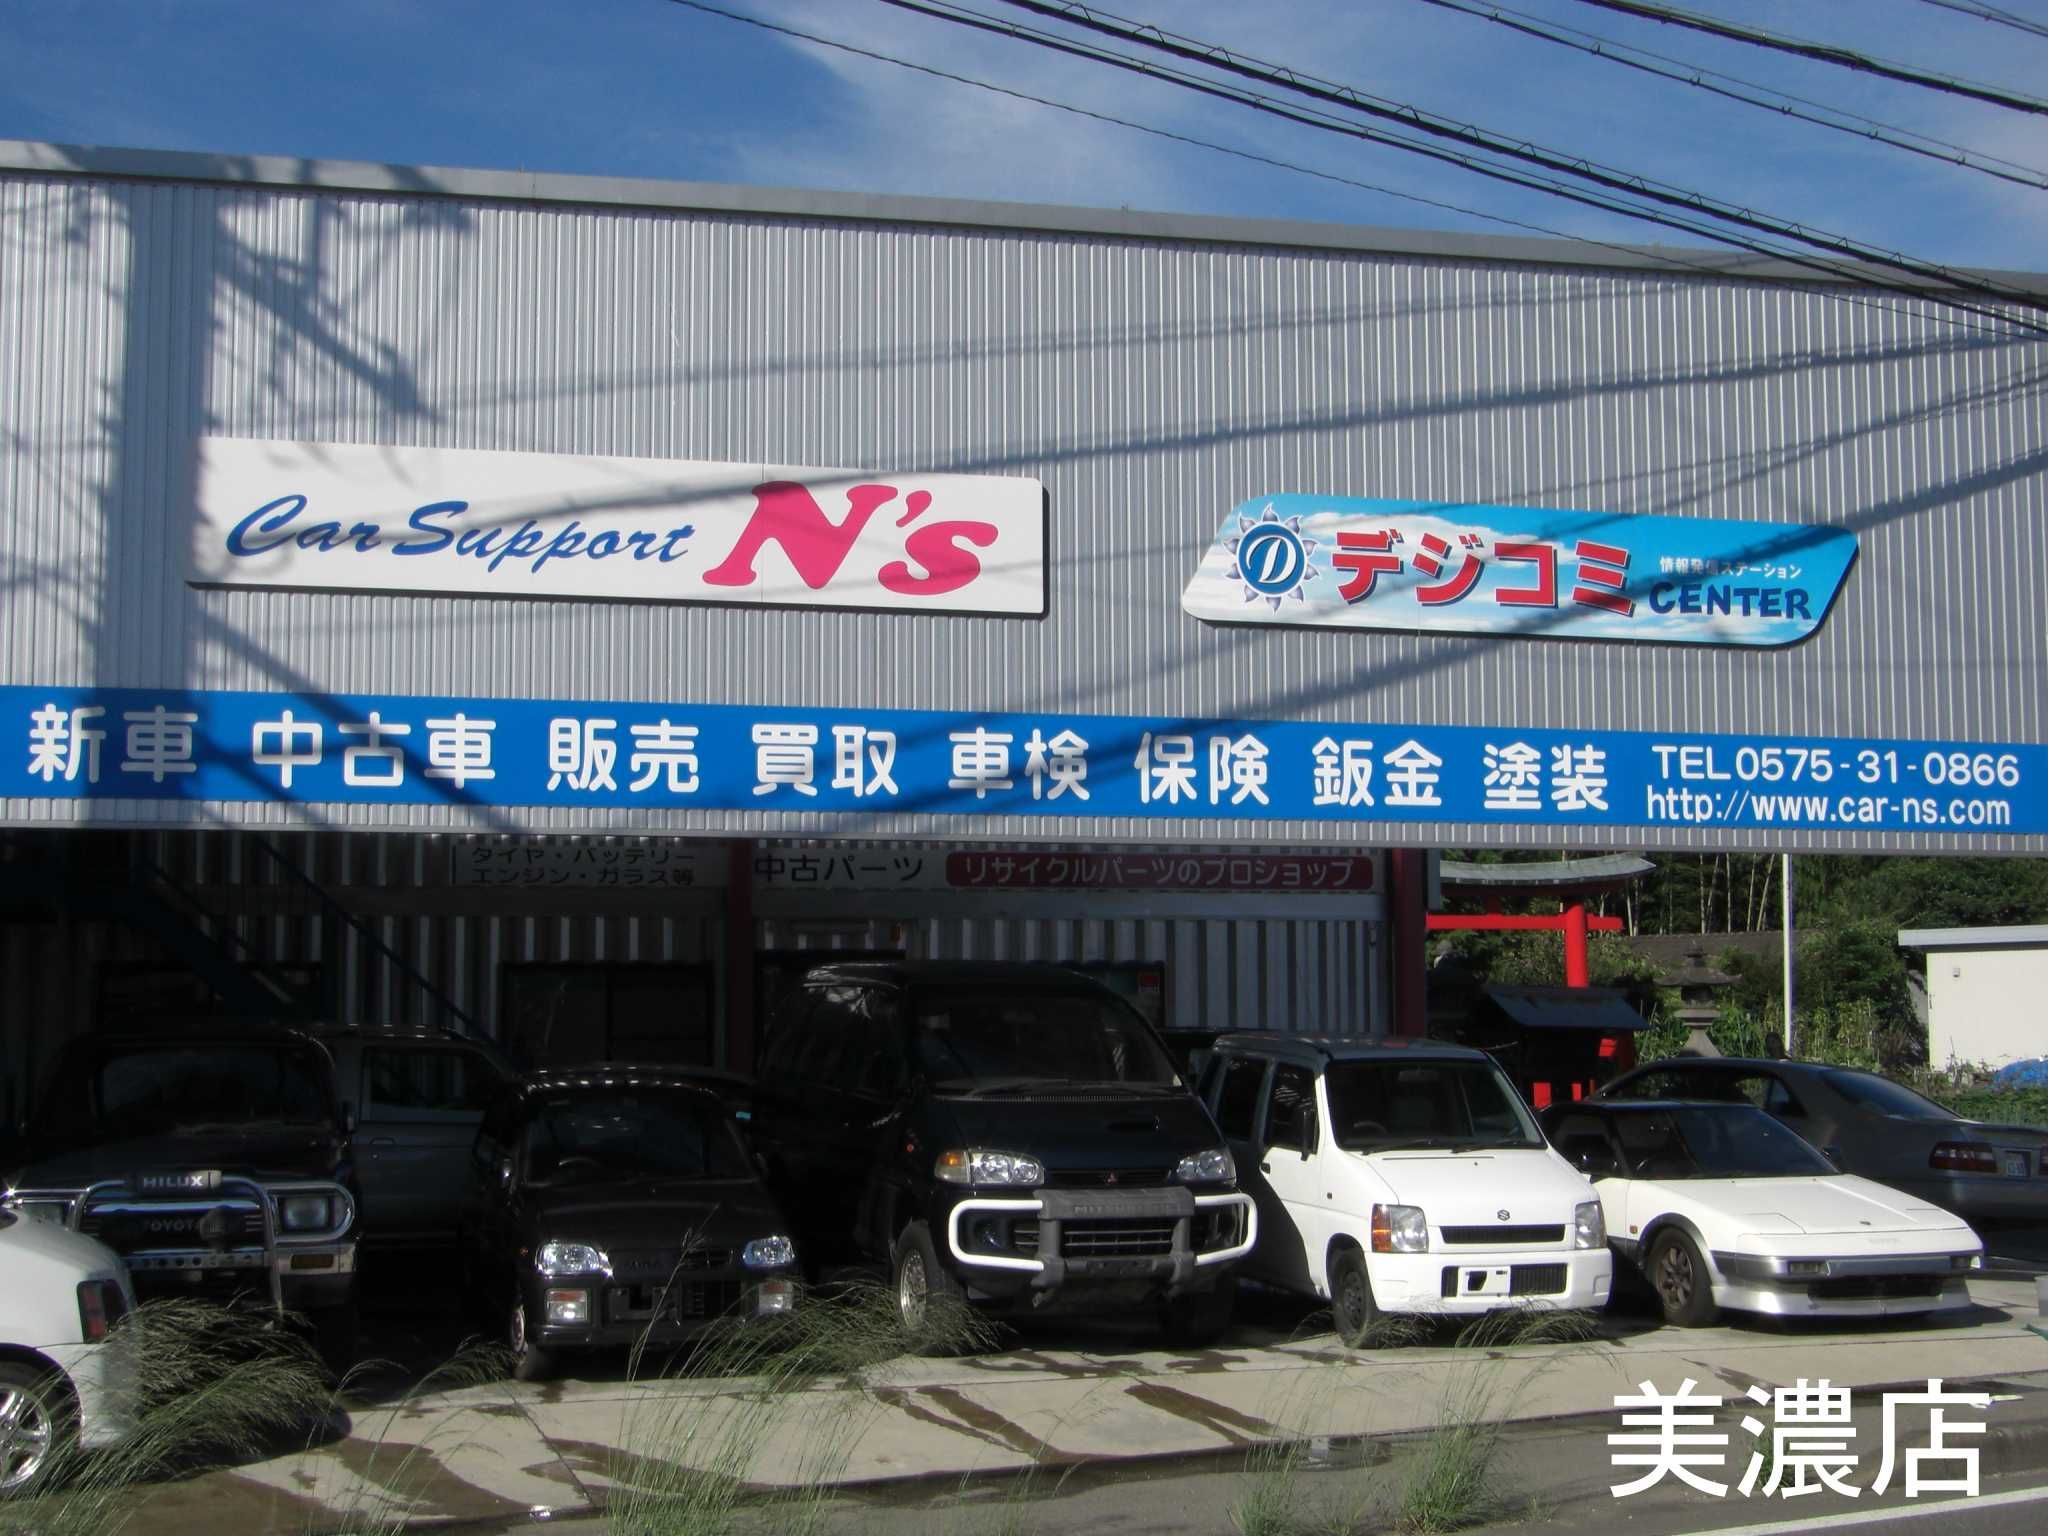 Car Support N's【ニーズ】